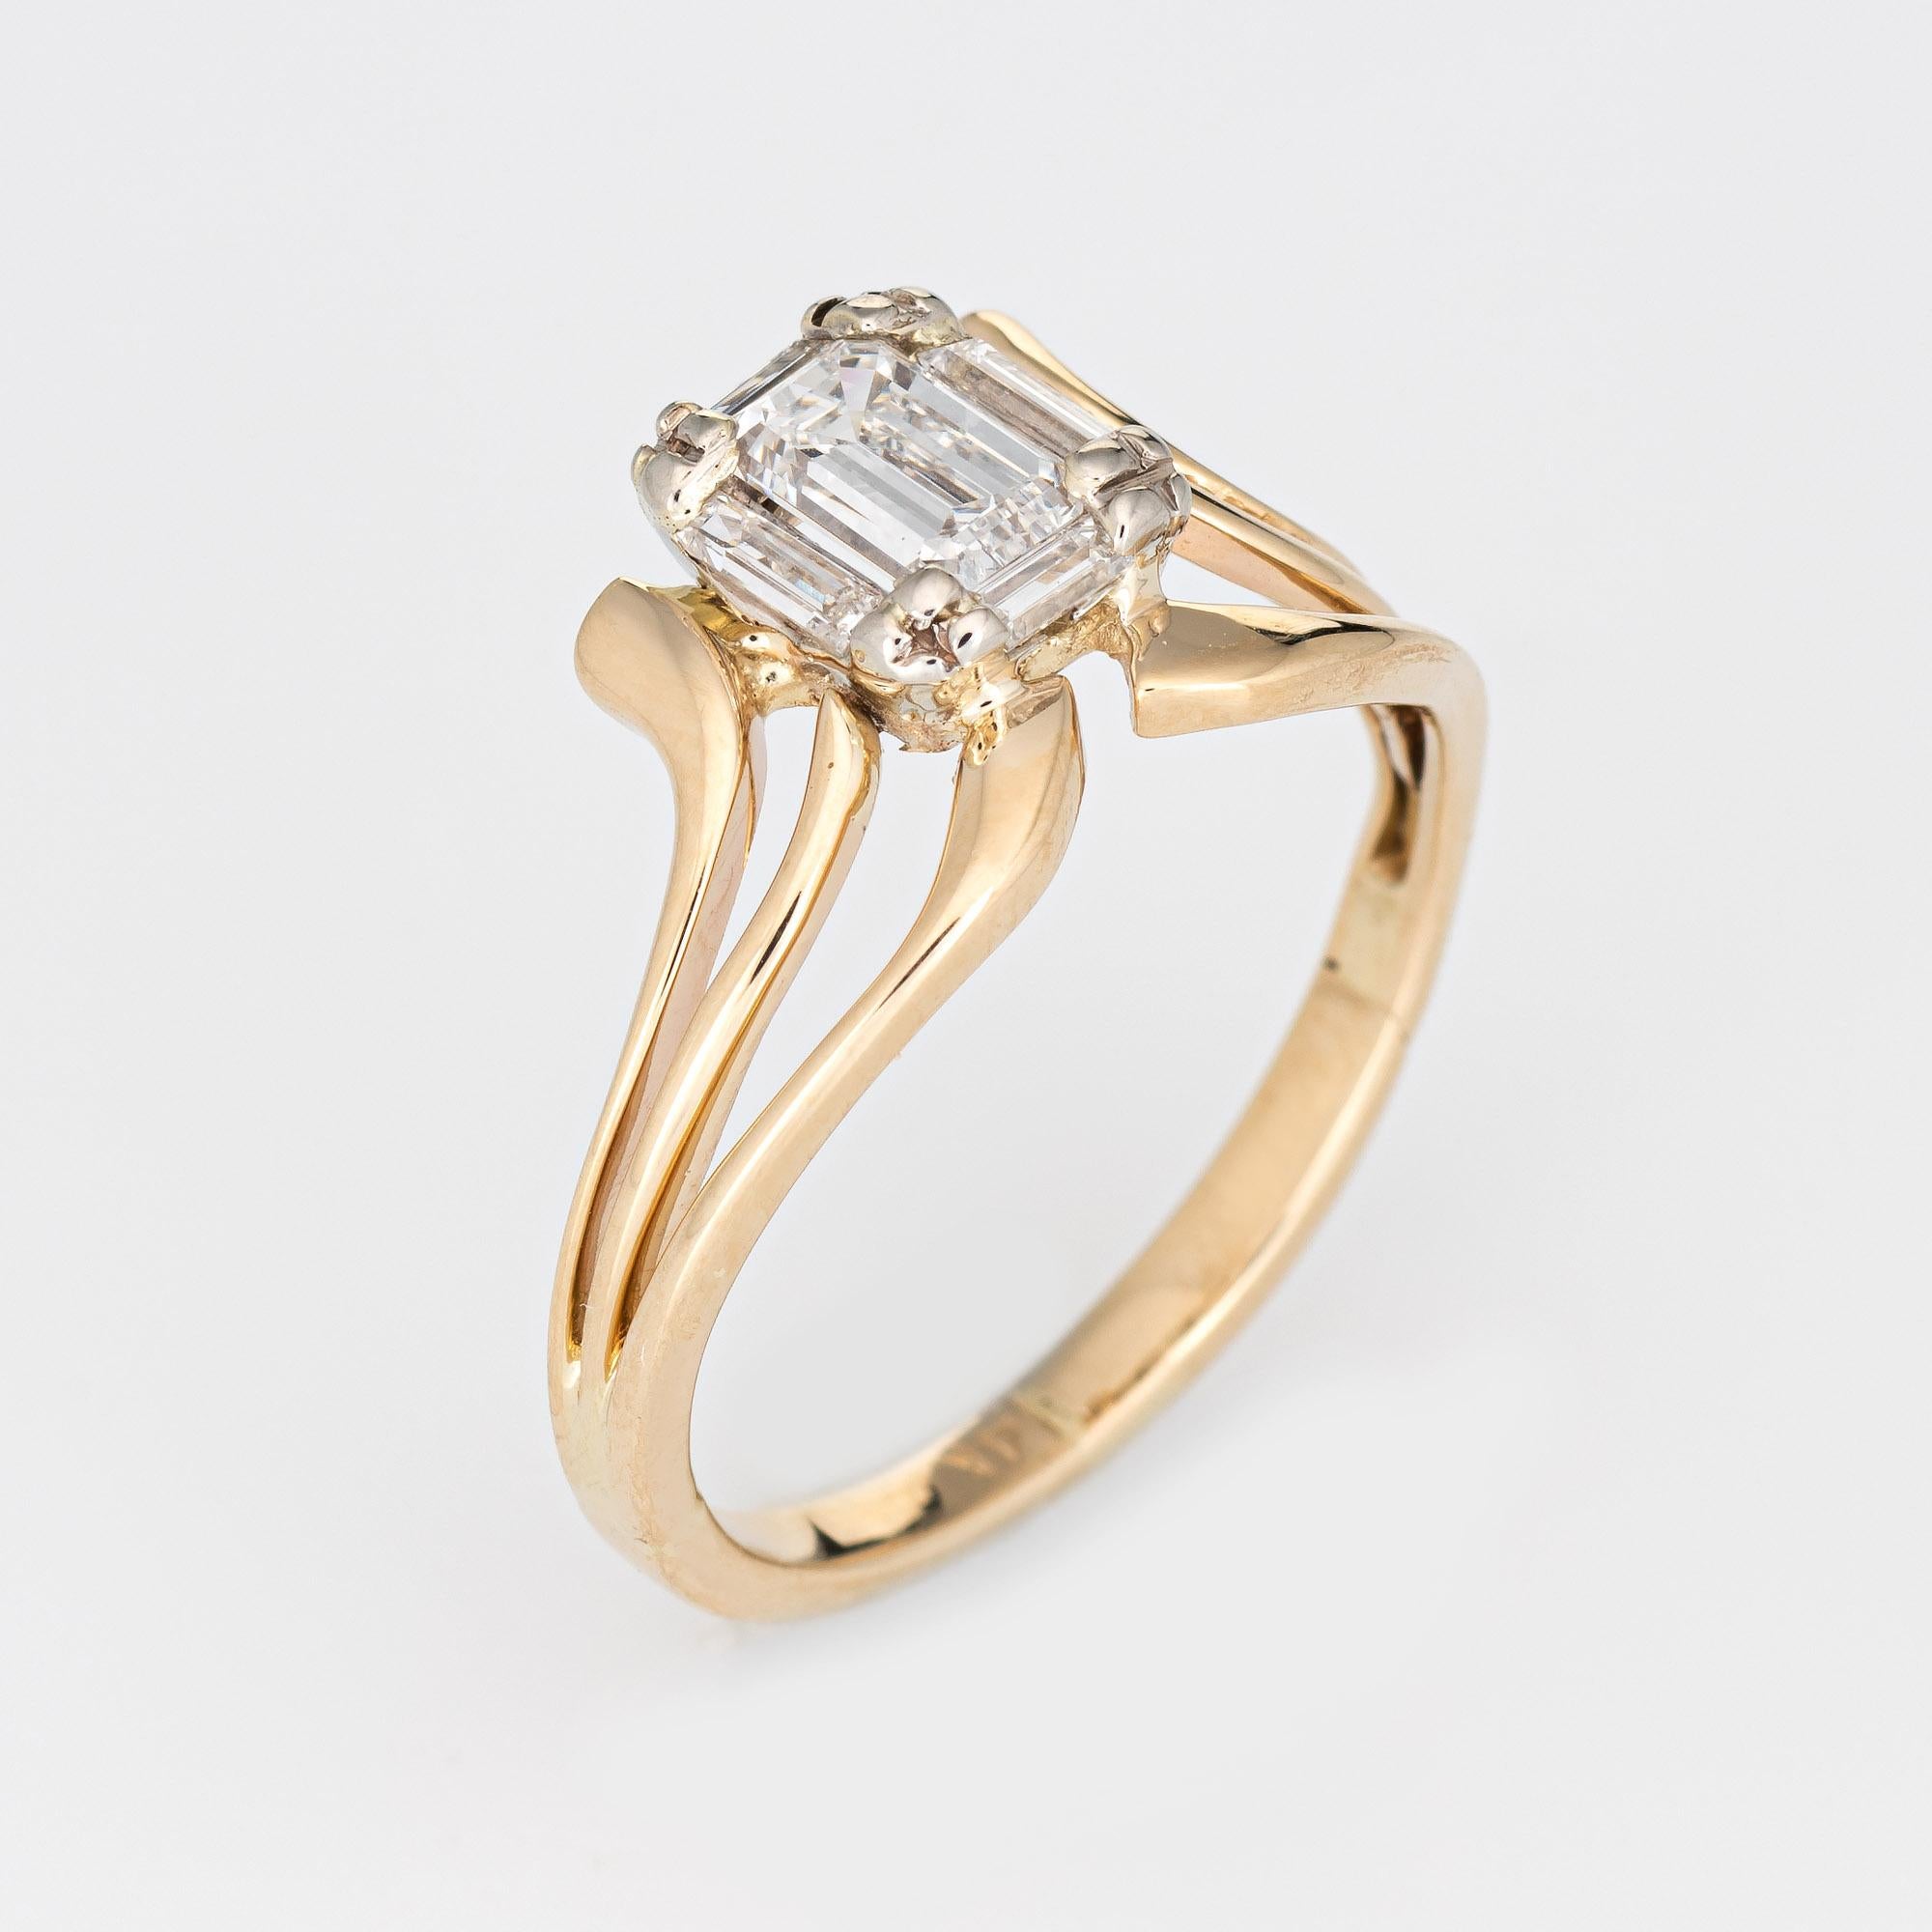 Stylish vintage emerald cut diamonds ring (circa 1960s) crafted in 14 karat yellow gold. 

Centrally mounted estimated 0.50 carat emerald cut diamond is accented with four estimated 0.20 carat straight baguette cut diamonds. The total diamond weight